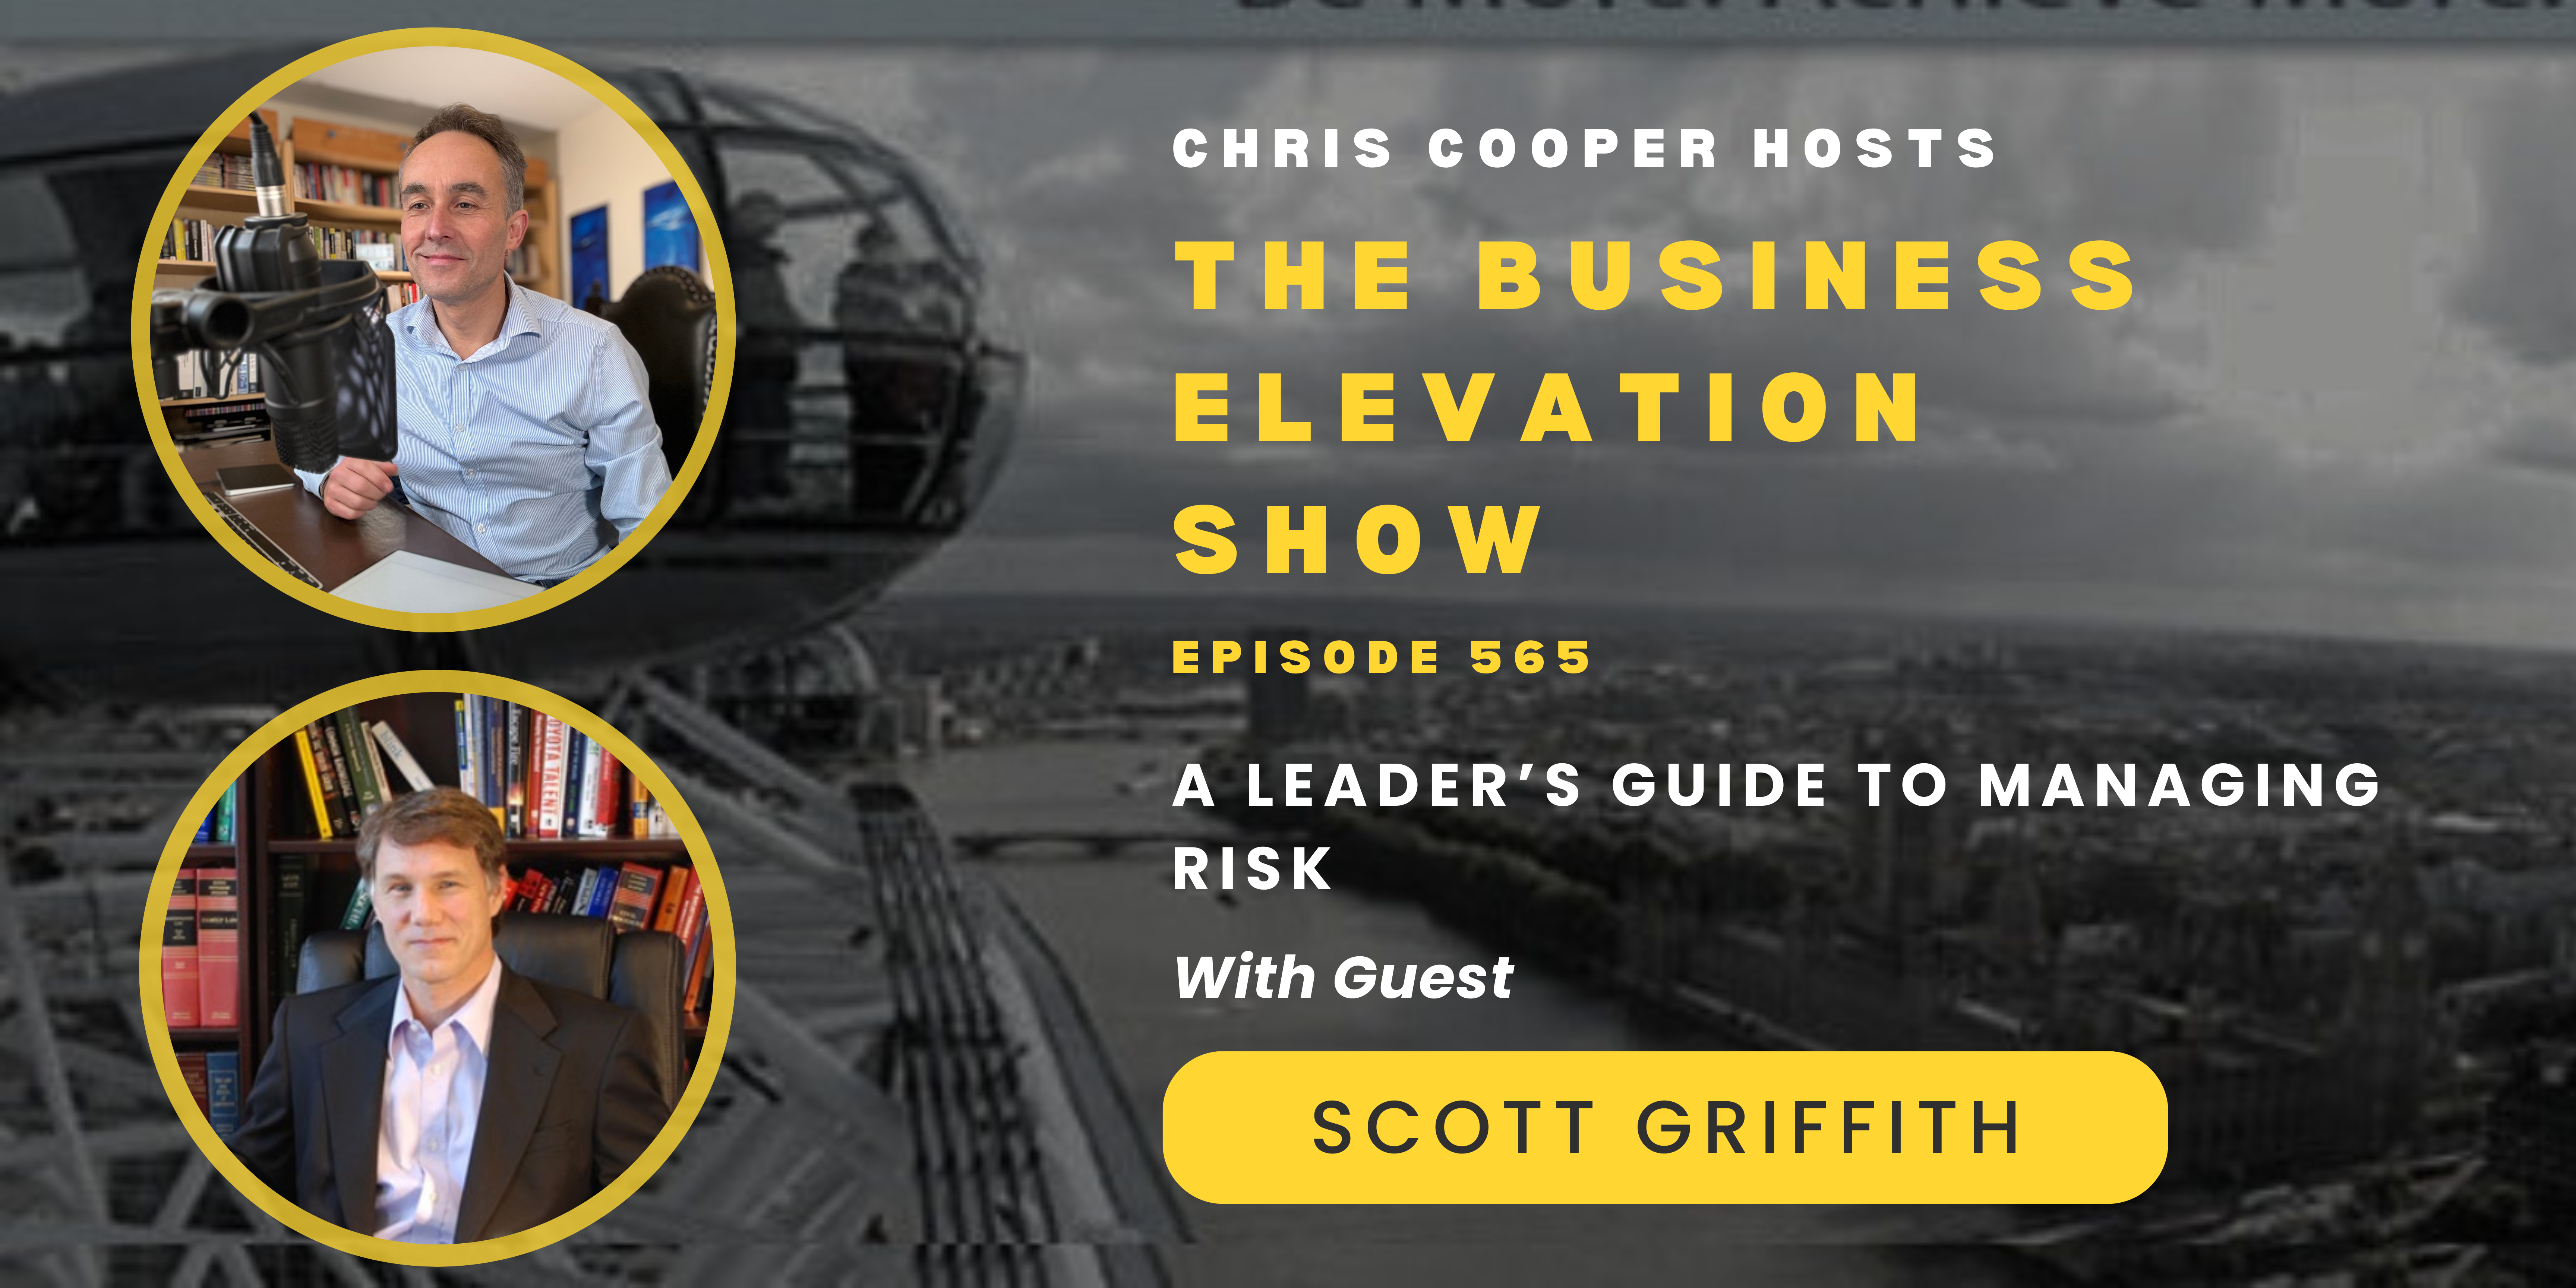 A Leader’s Guide to Managing Risk with Scott Griffith